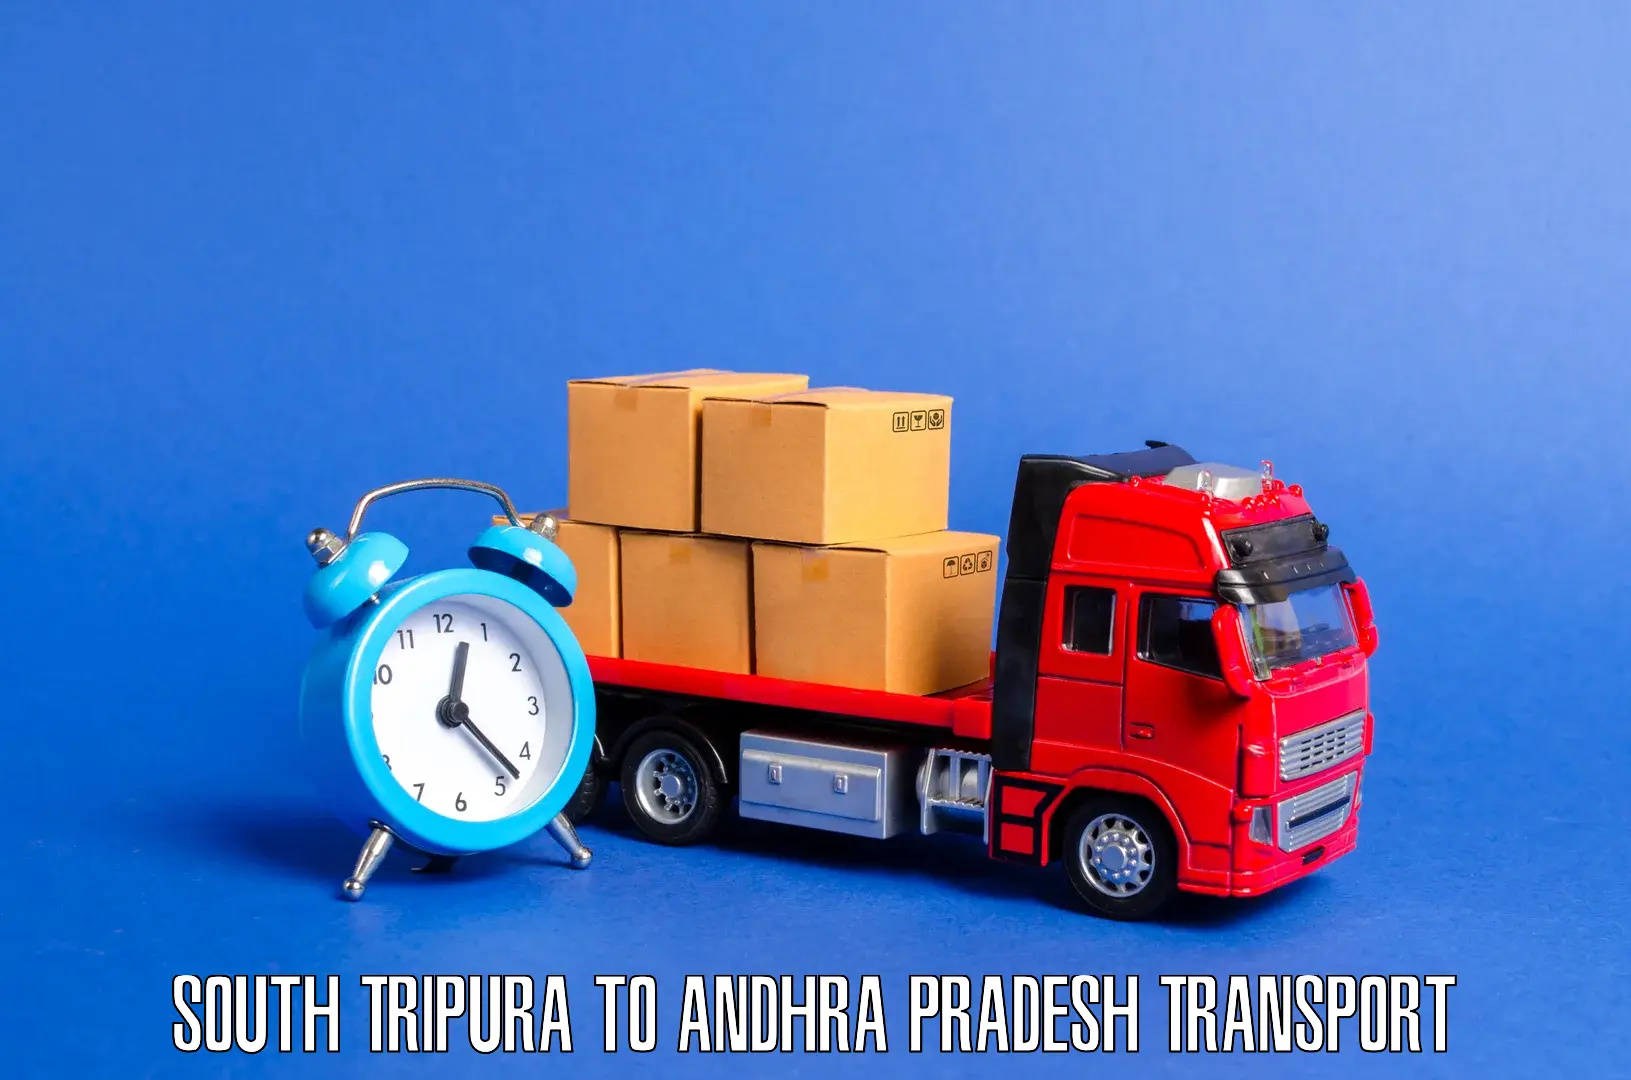 Transport bike from one state to another South Tripura to Martur